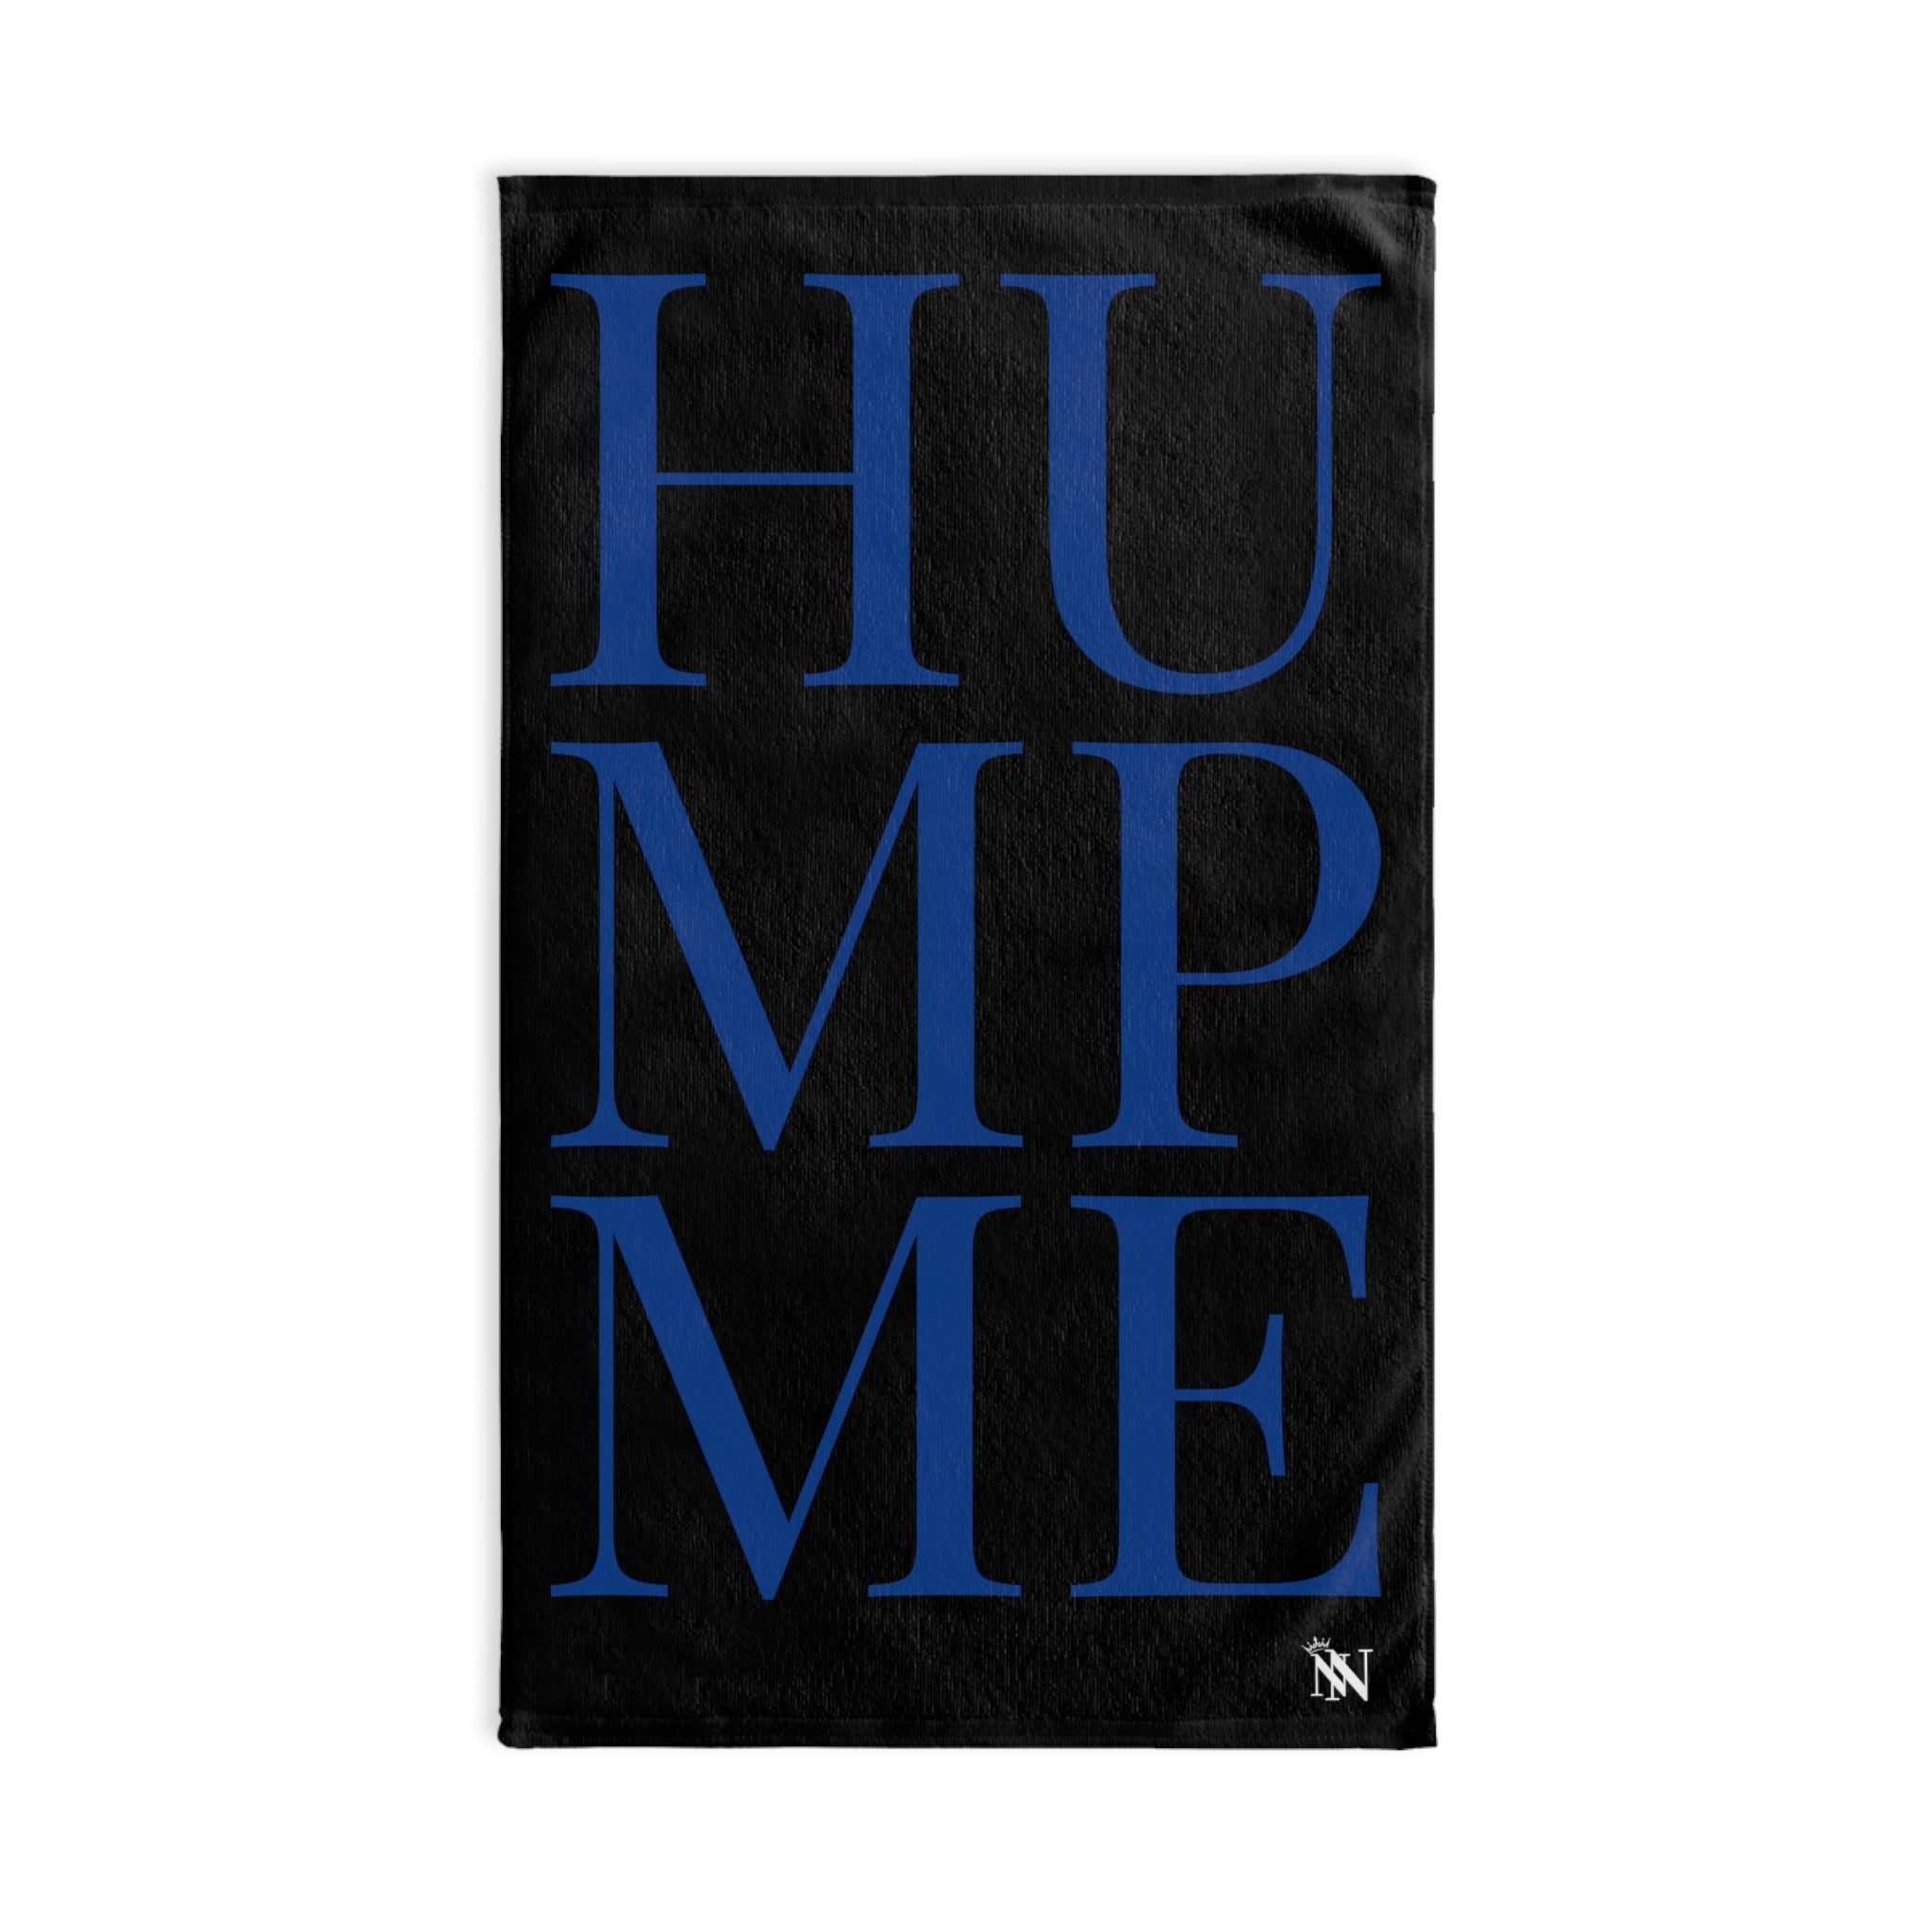 Hump Me Blue Black | Sexy Gifts for Boyfriend, Funny Towel Romantic Gift for Wedding Couple Fiance First Year 2nd Anniversary Valentines, Party Gag Gifts, Joke Humor Cloth for Husband Men BF NECTAR NAPKINS